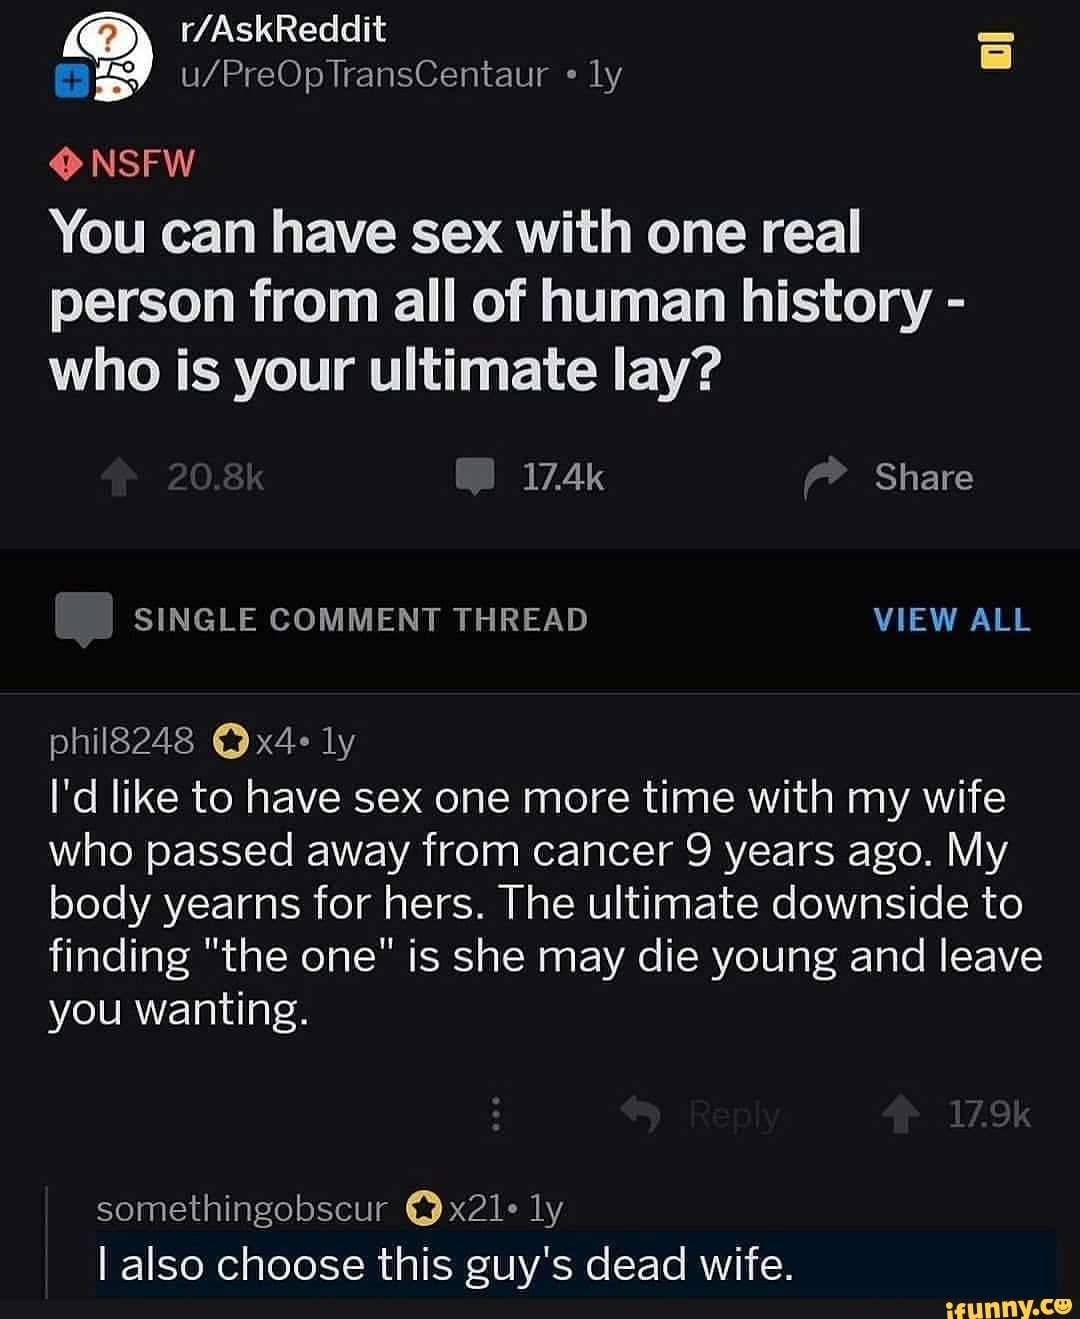 4 NSFW You can have sex with one real person from all of human history photo pic